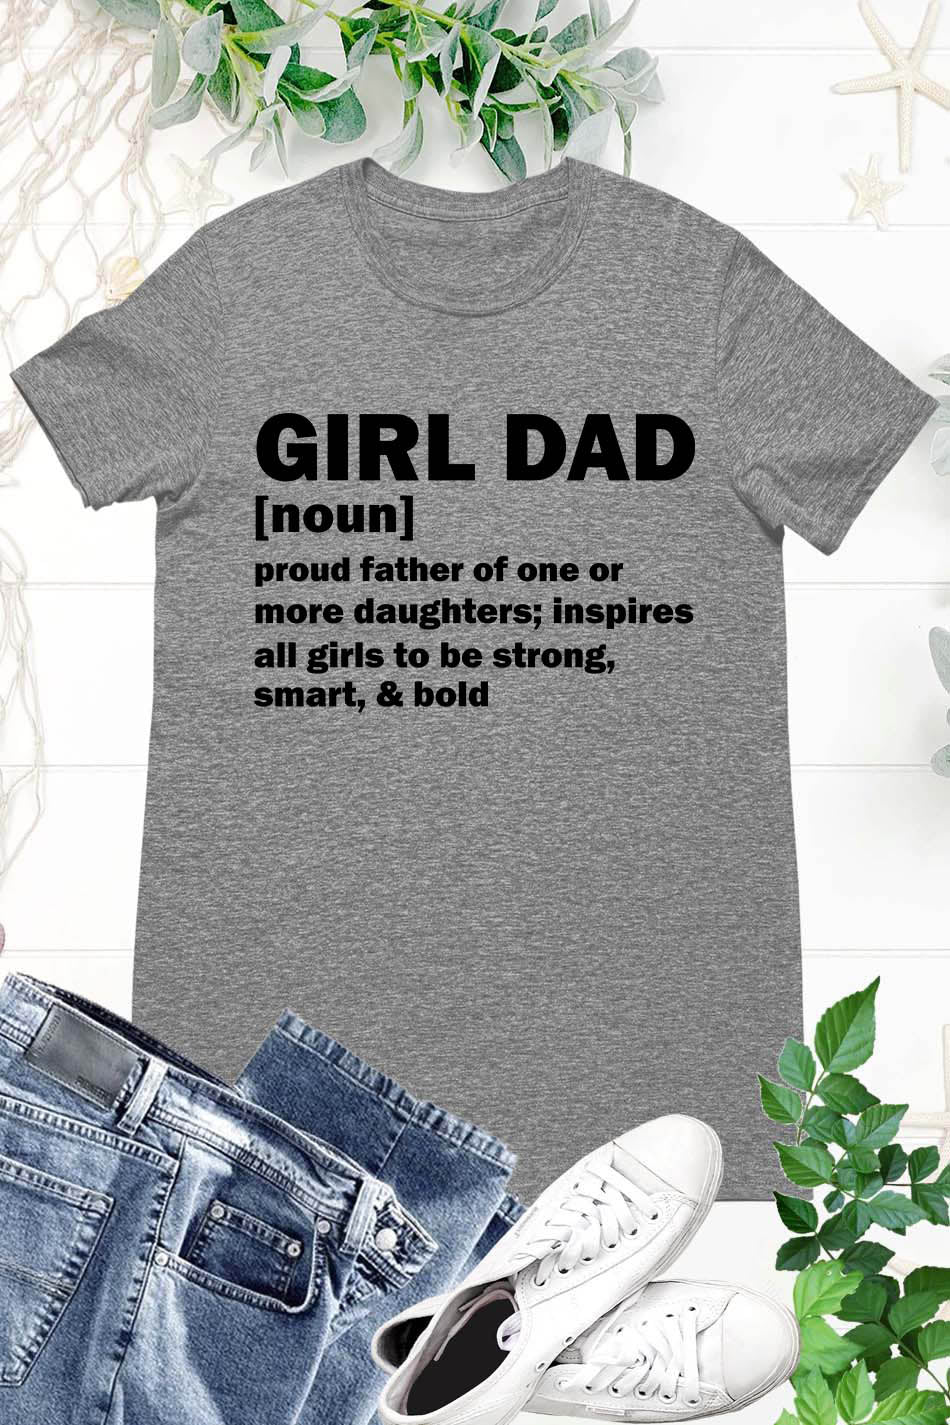 Dad T Shirts From Daughter